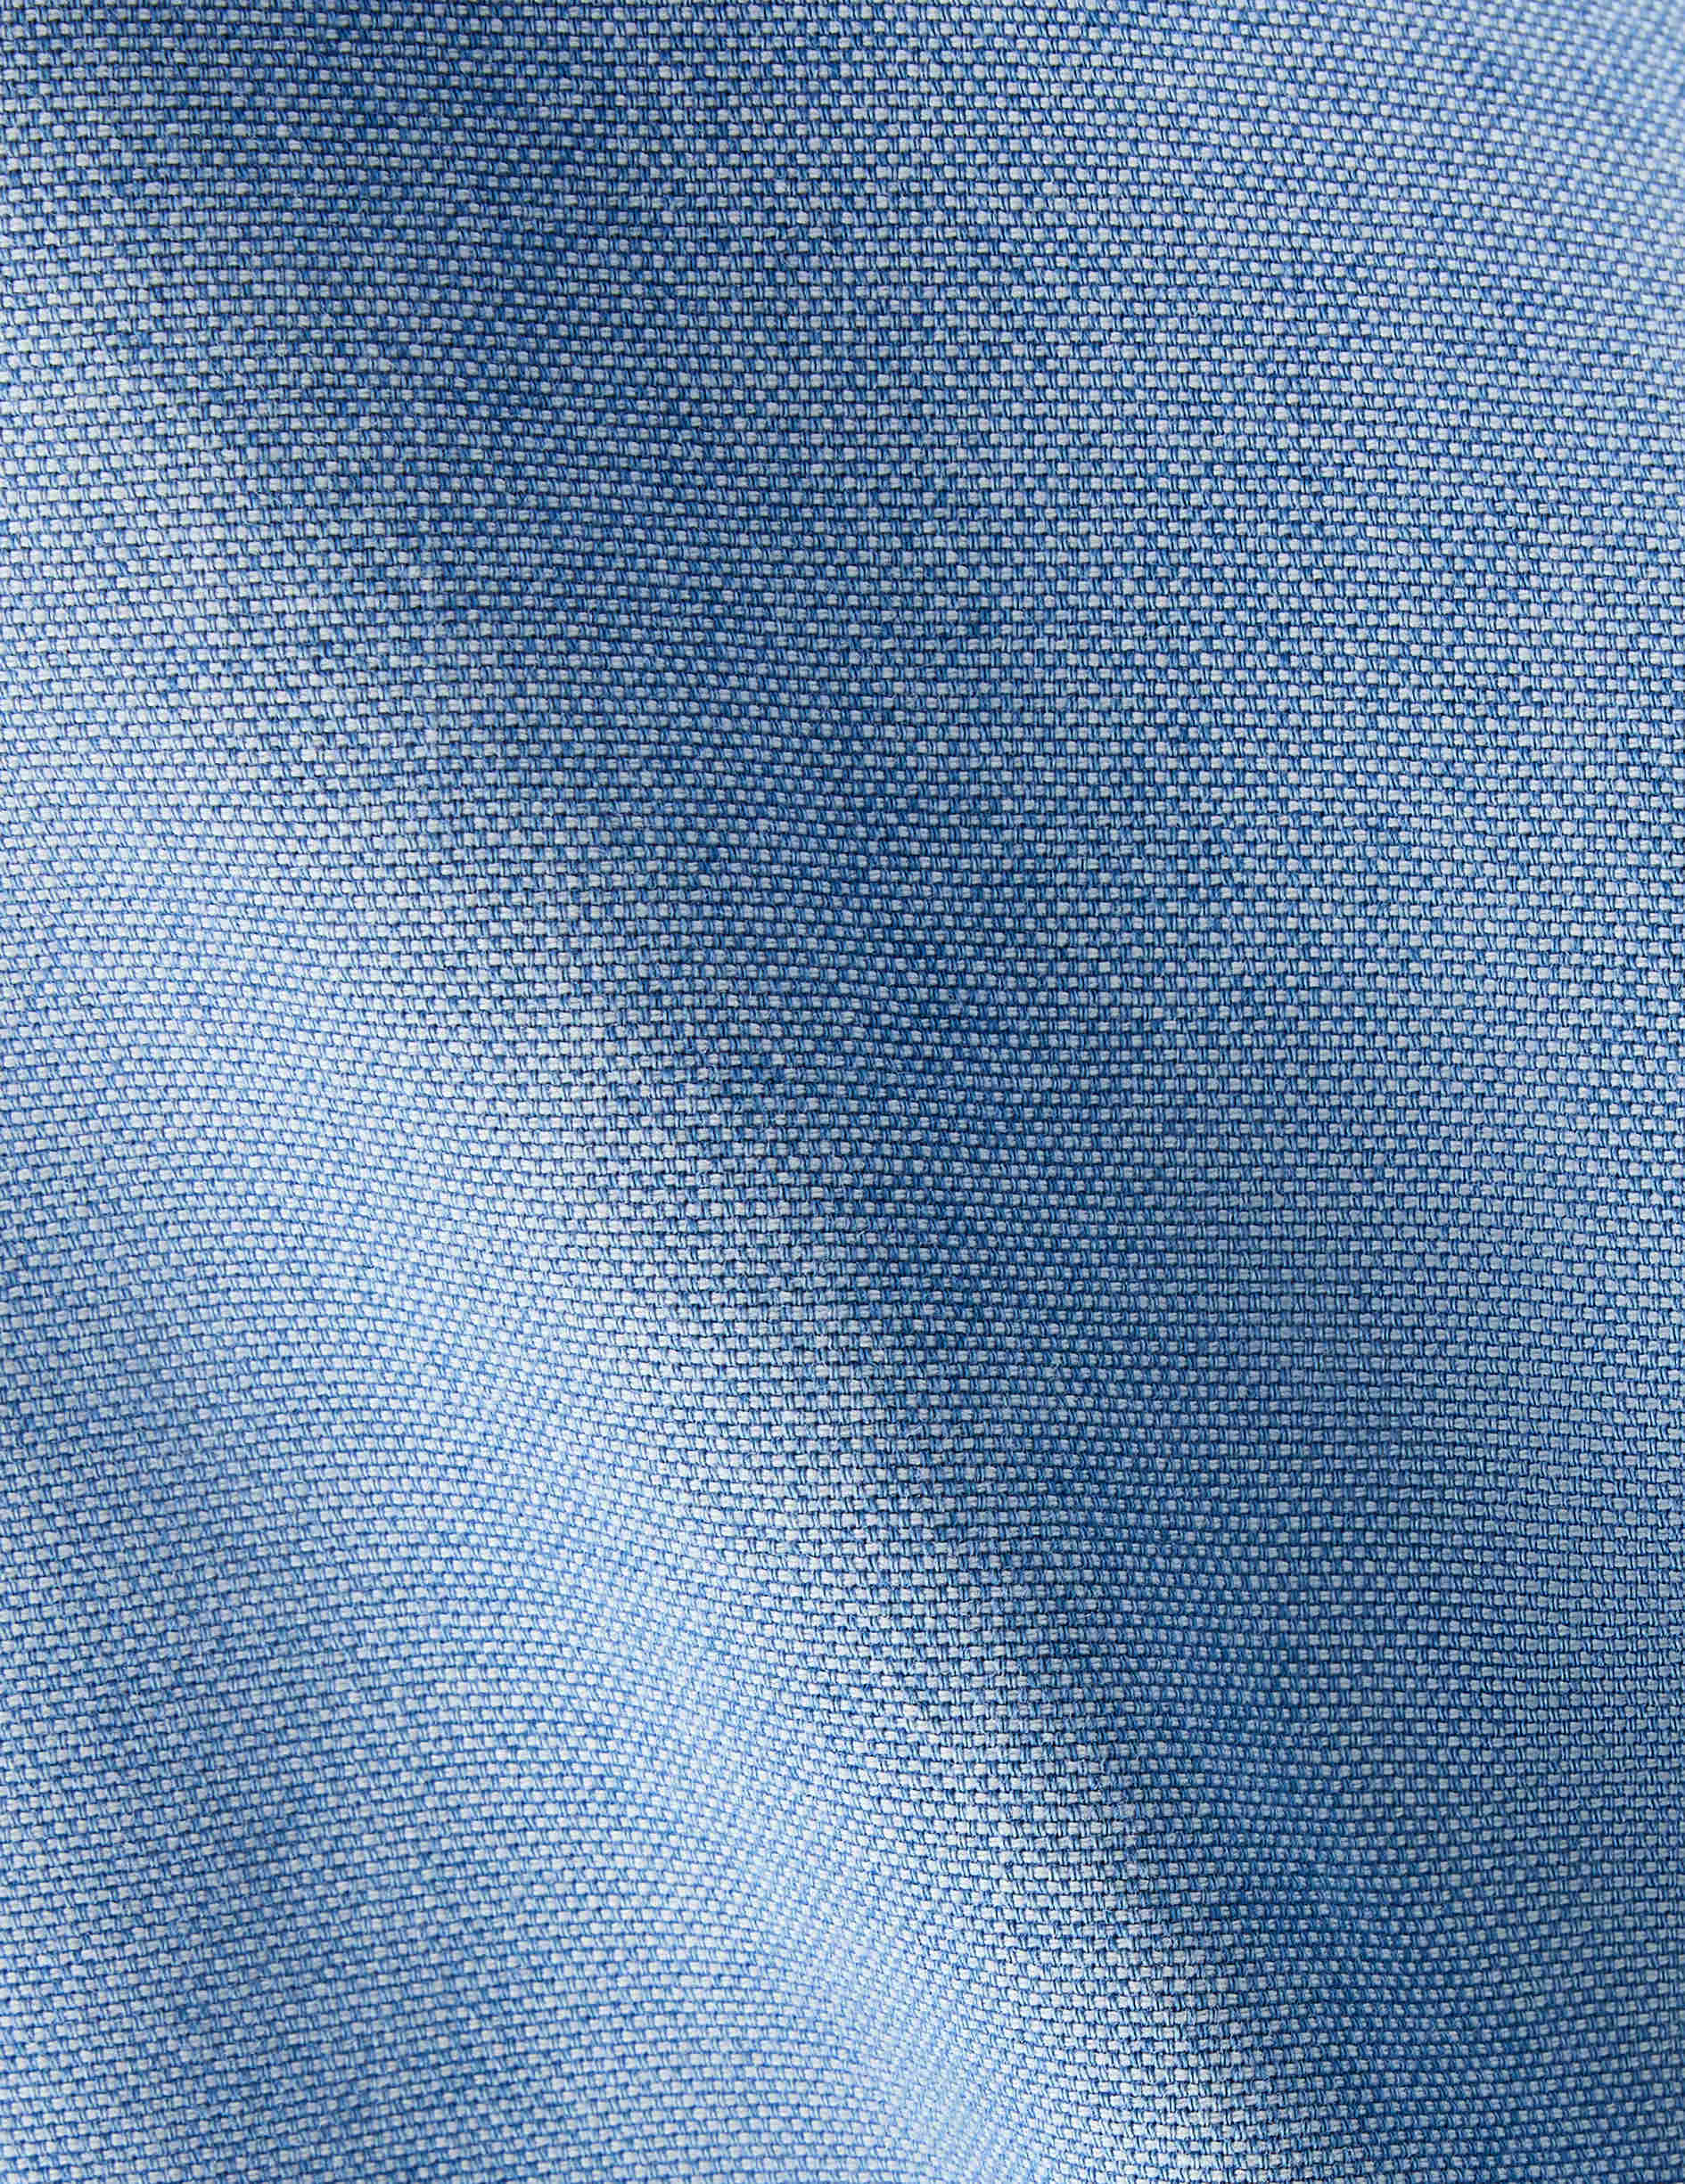 Chemise mixte "Je t'aime" bleu clair - Chambray - Col Figaret